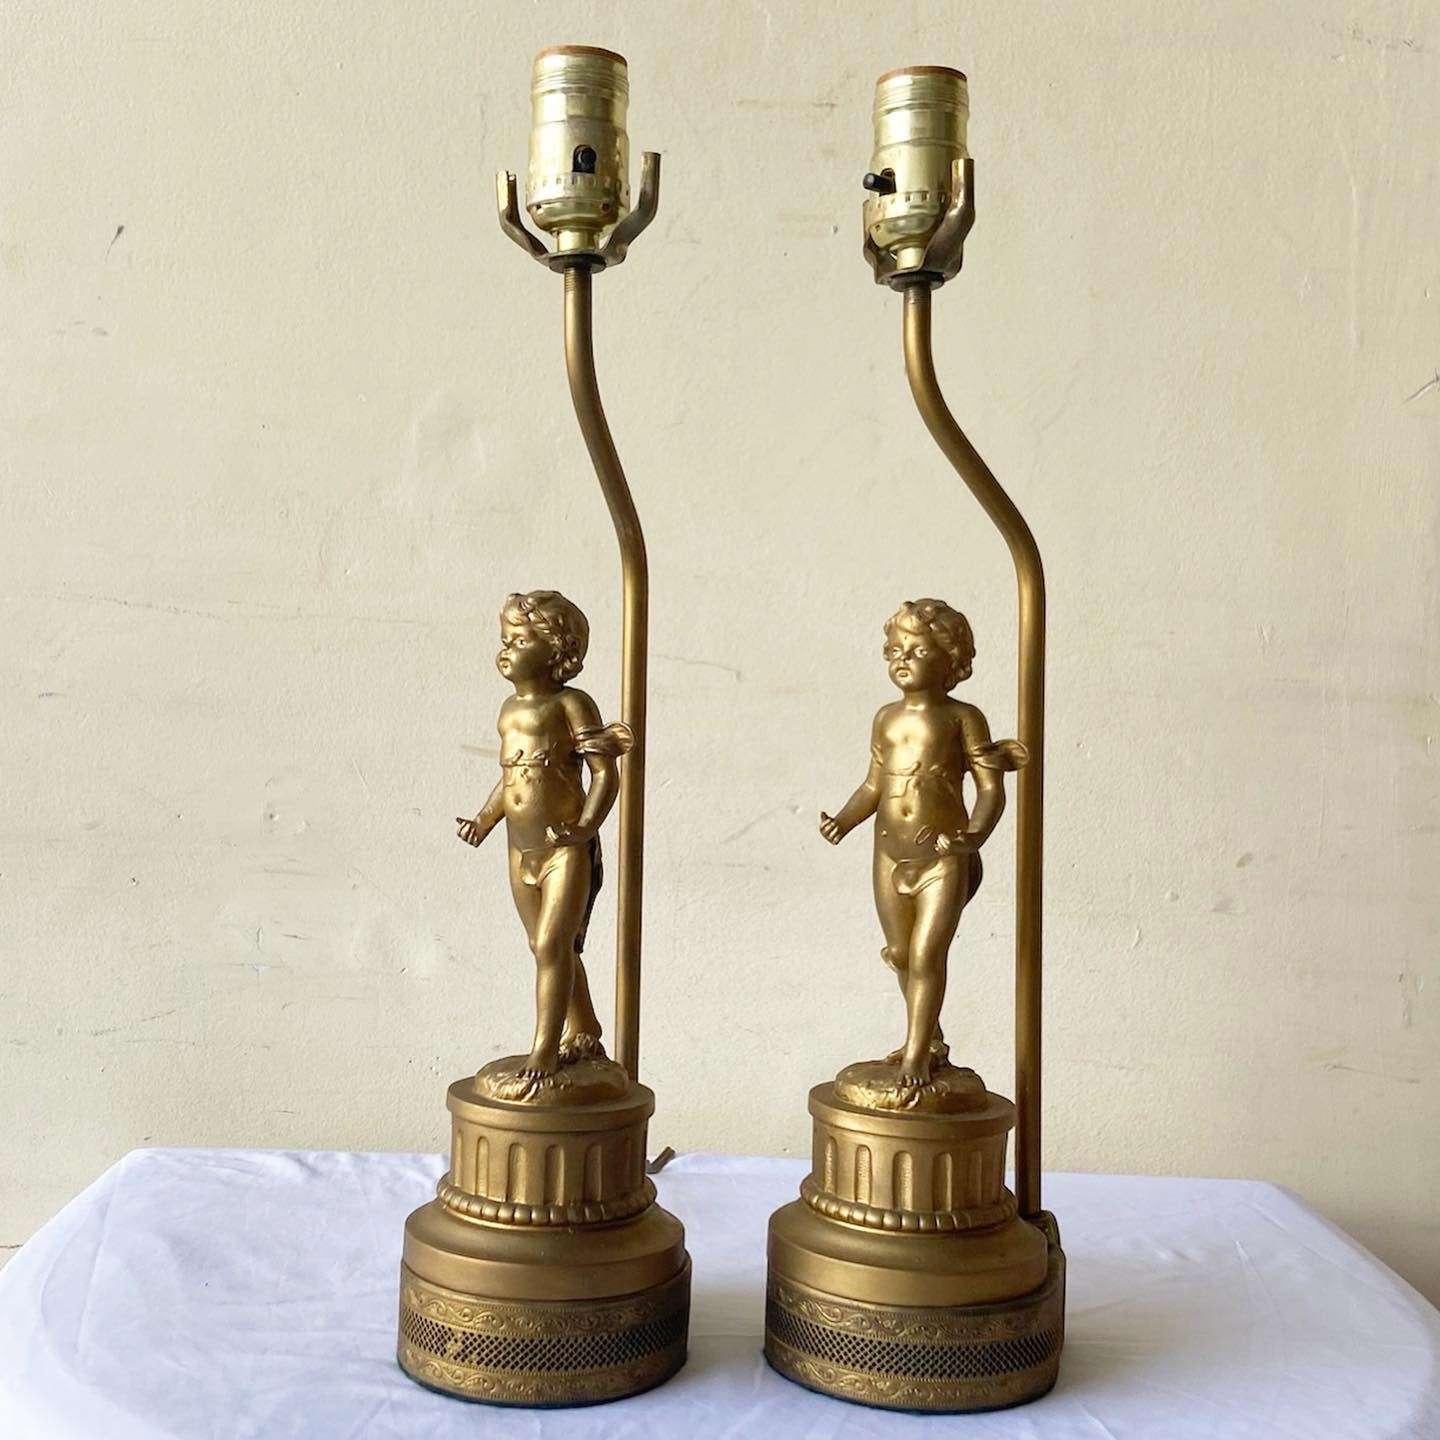 Amazing pair of French gilt metal table lamps. Each display a gilded cherub by Fabrication Francaise.

One way lighting
